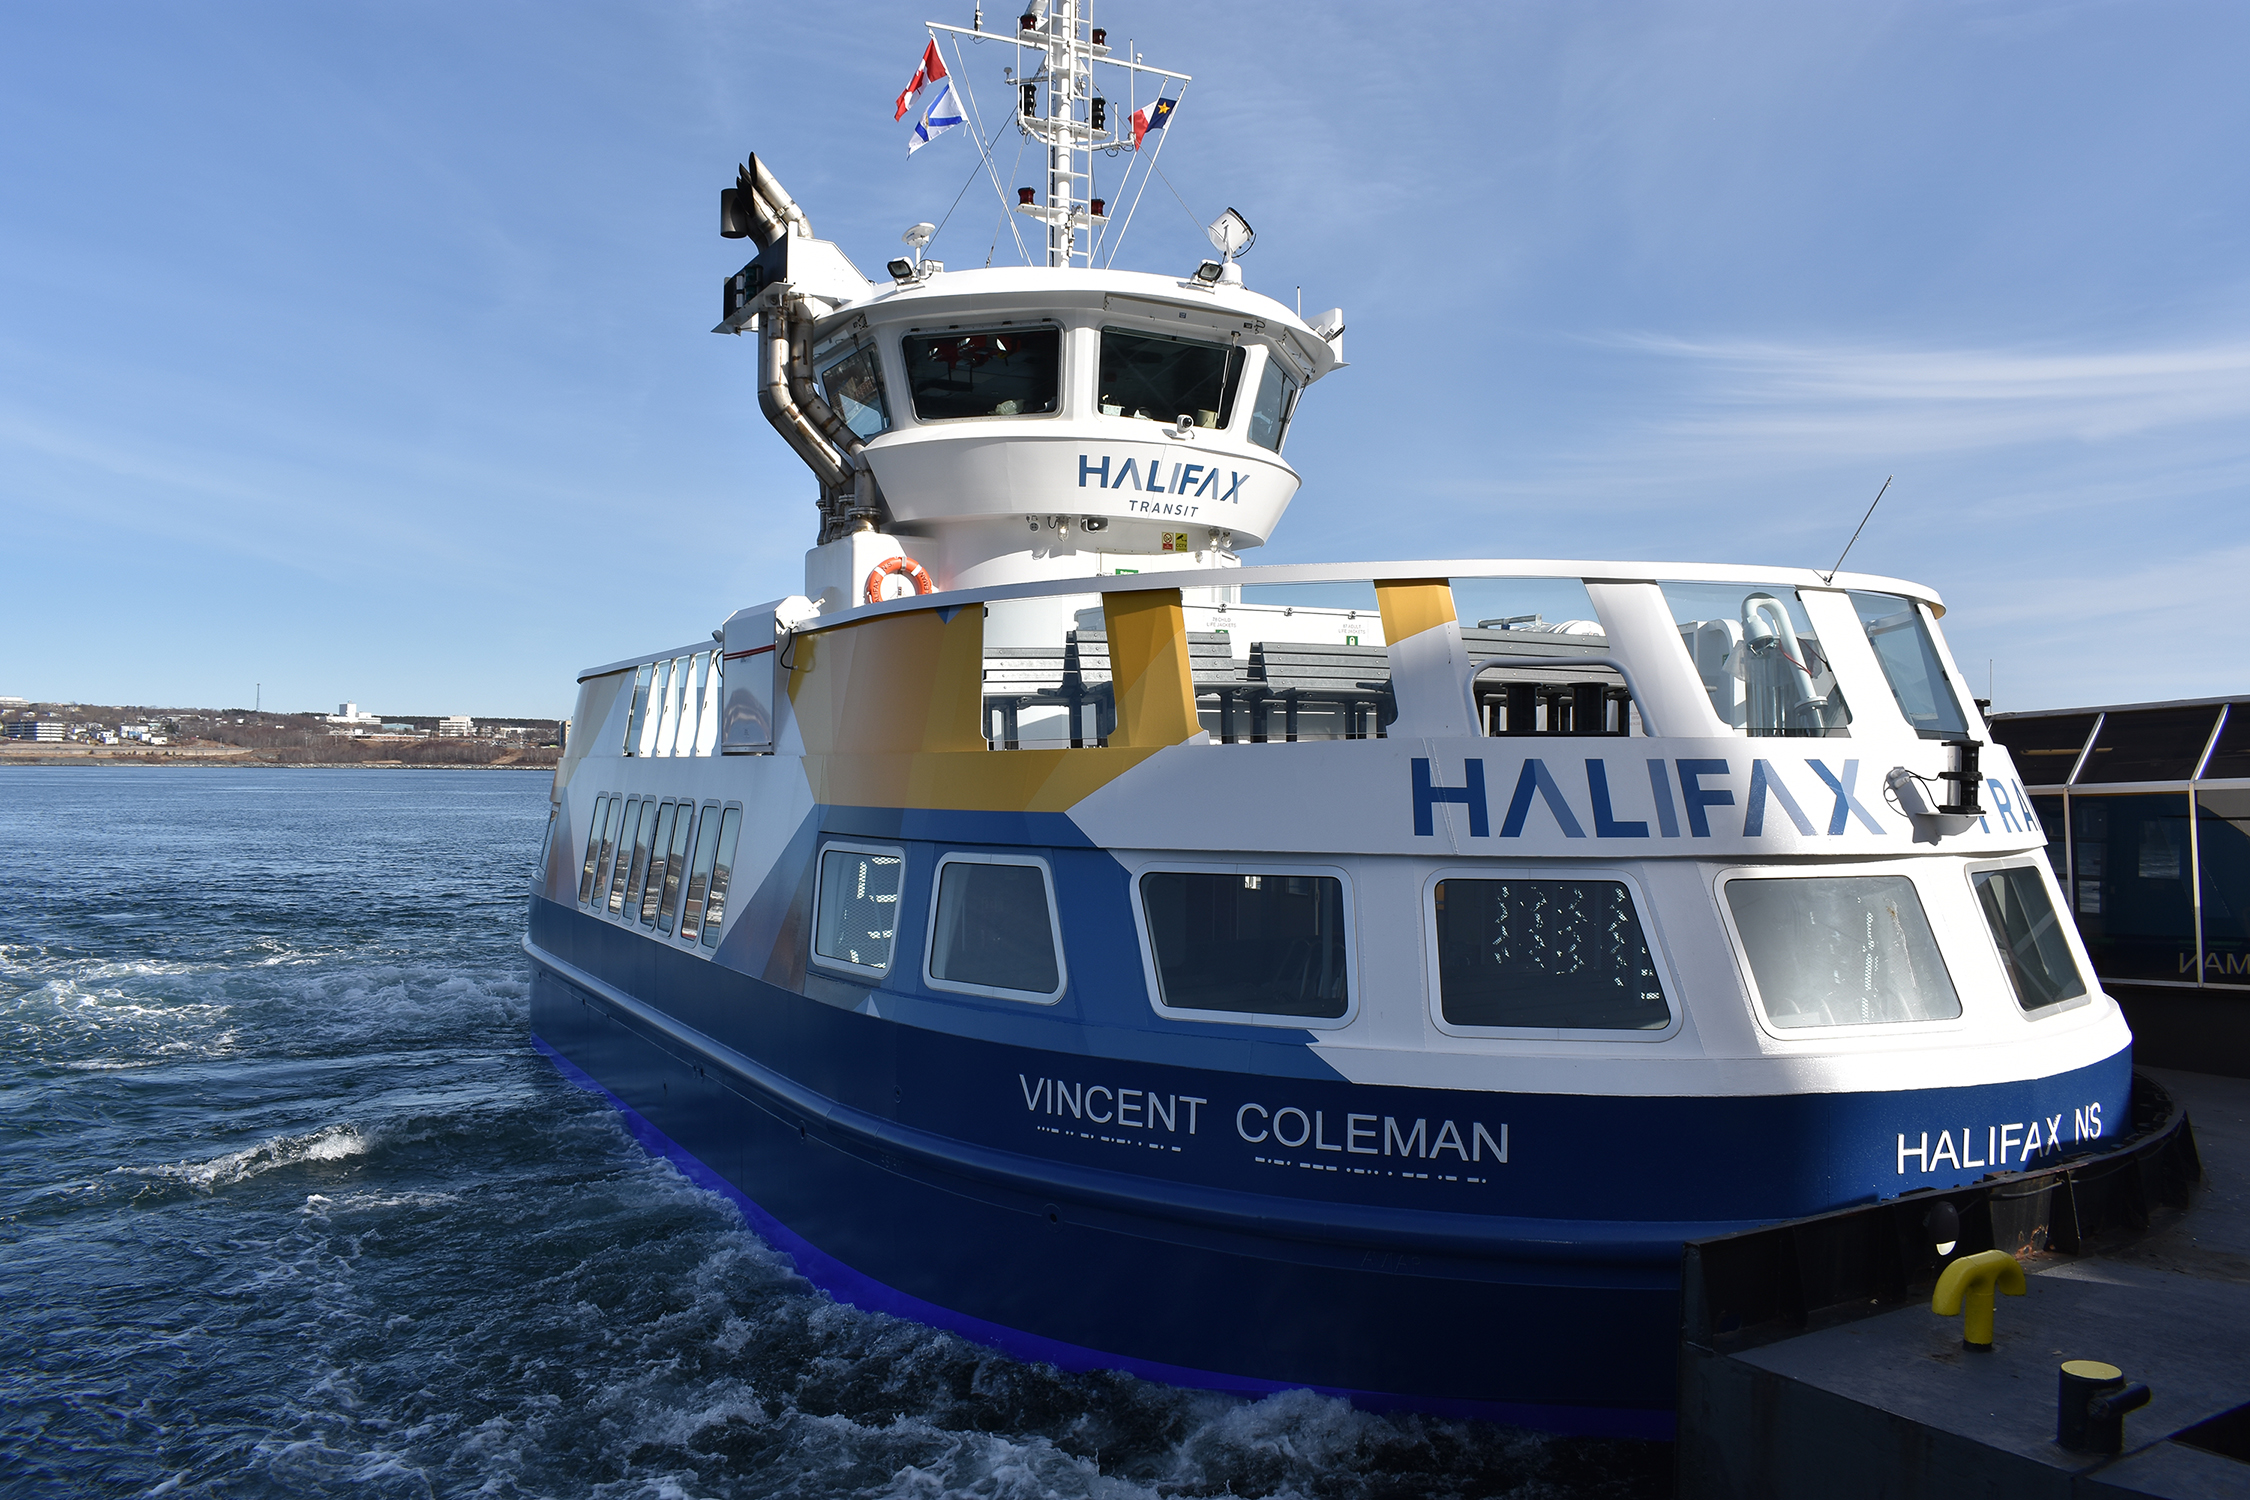 Halifax Transit on X: #DYK The Vincent Coleman ferry also has its name in  Morse code? During the events of the Halifax Explosion, Vincent stayed  behind to warn an inbound train of